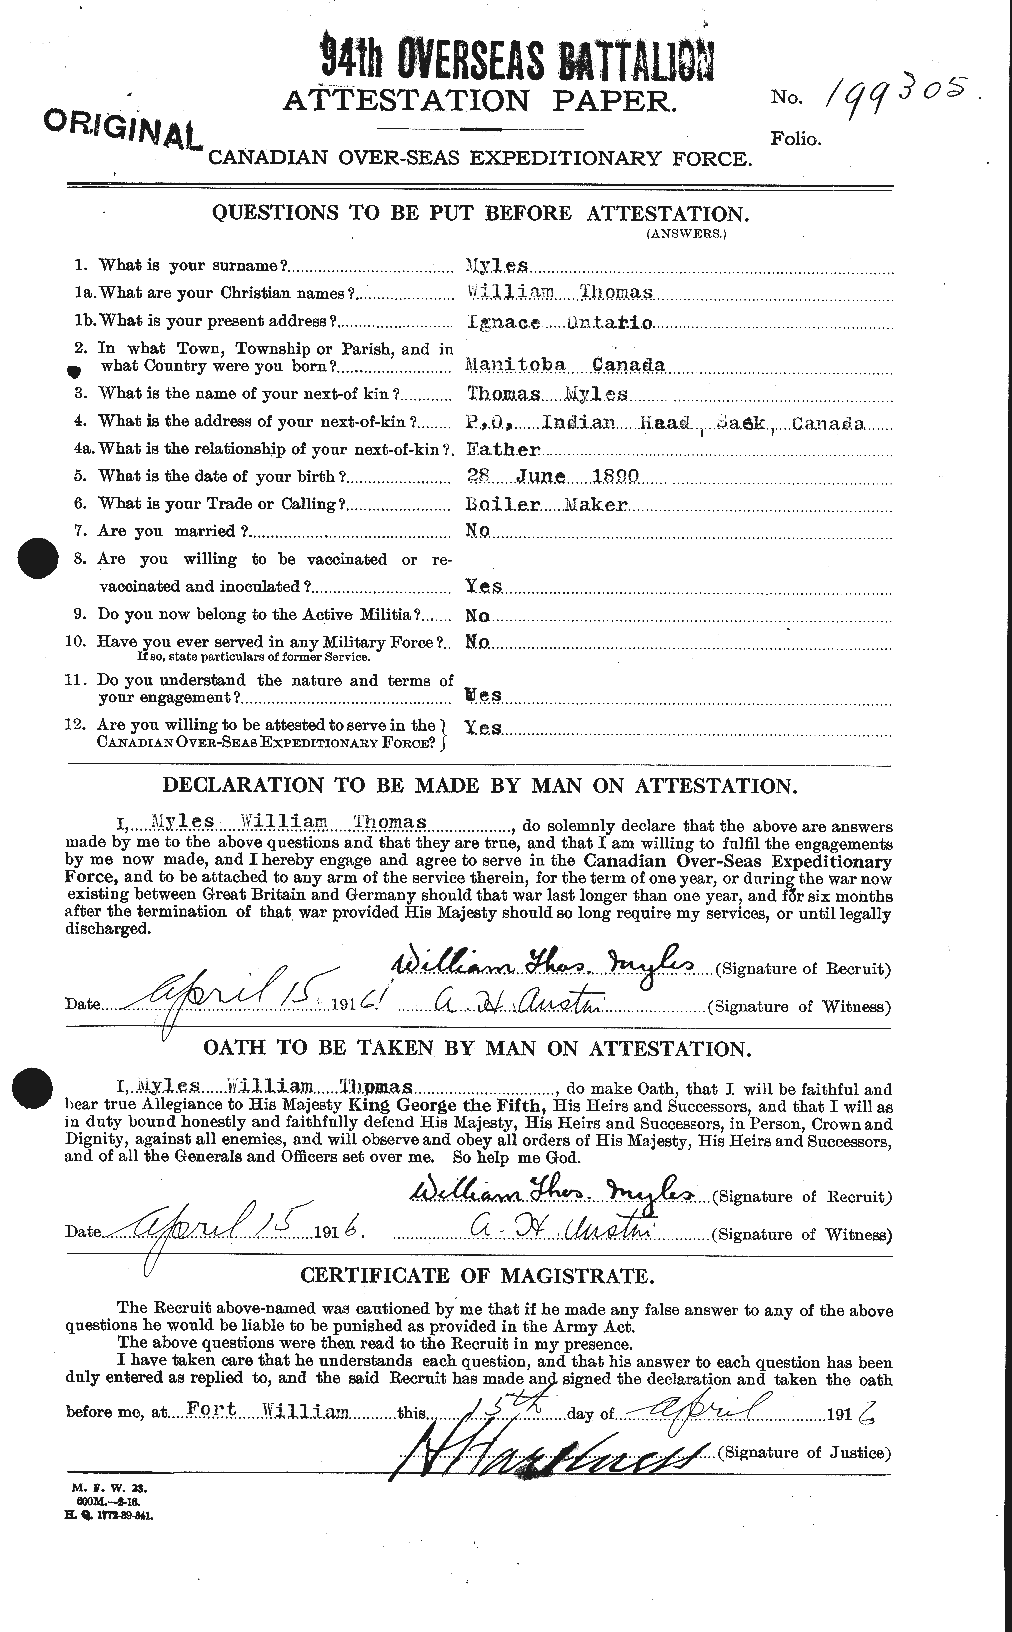 Personnel Records of the First World War - CEF 516944a